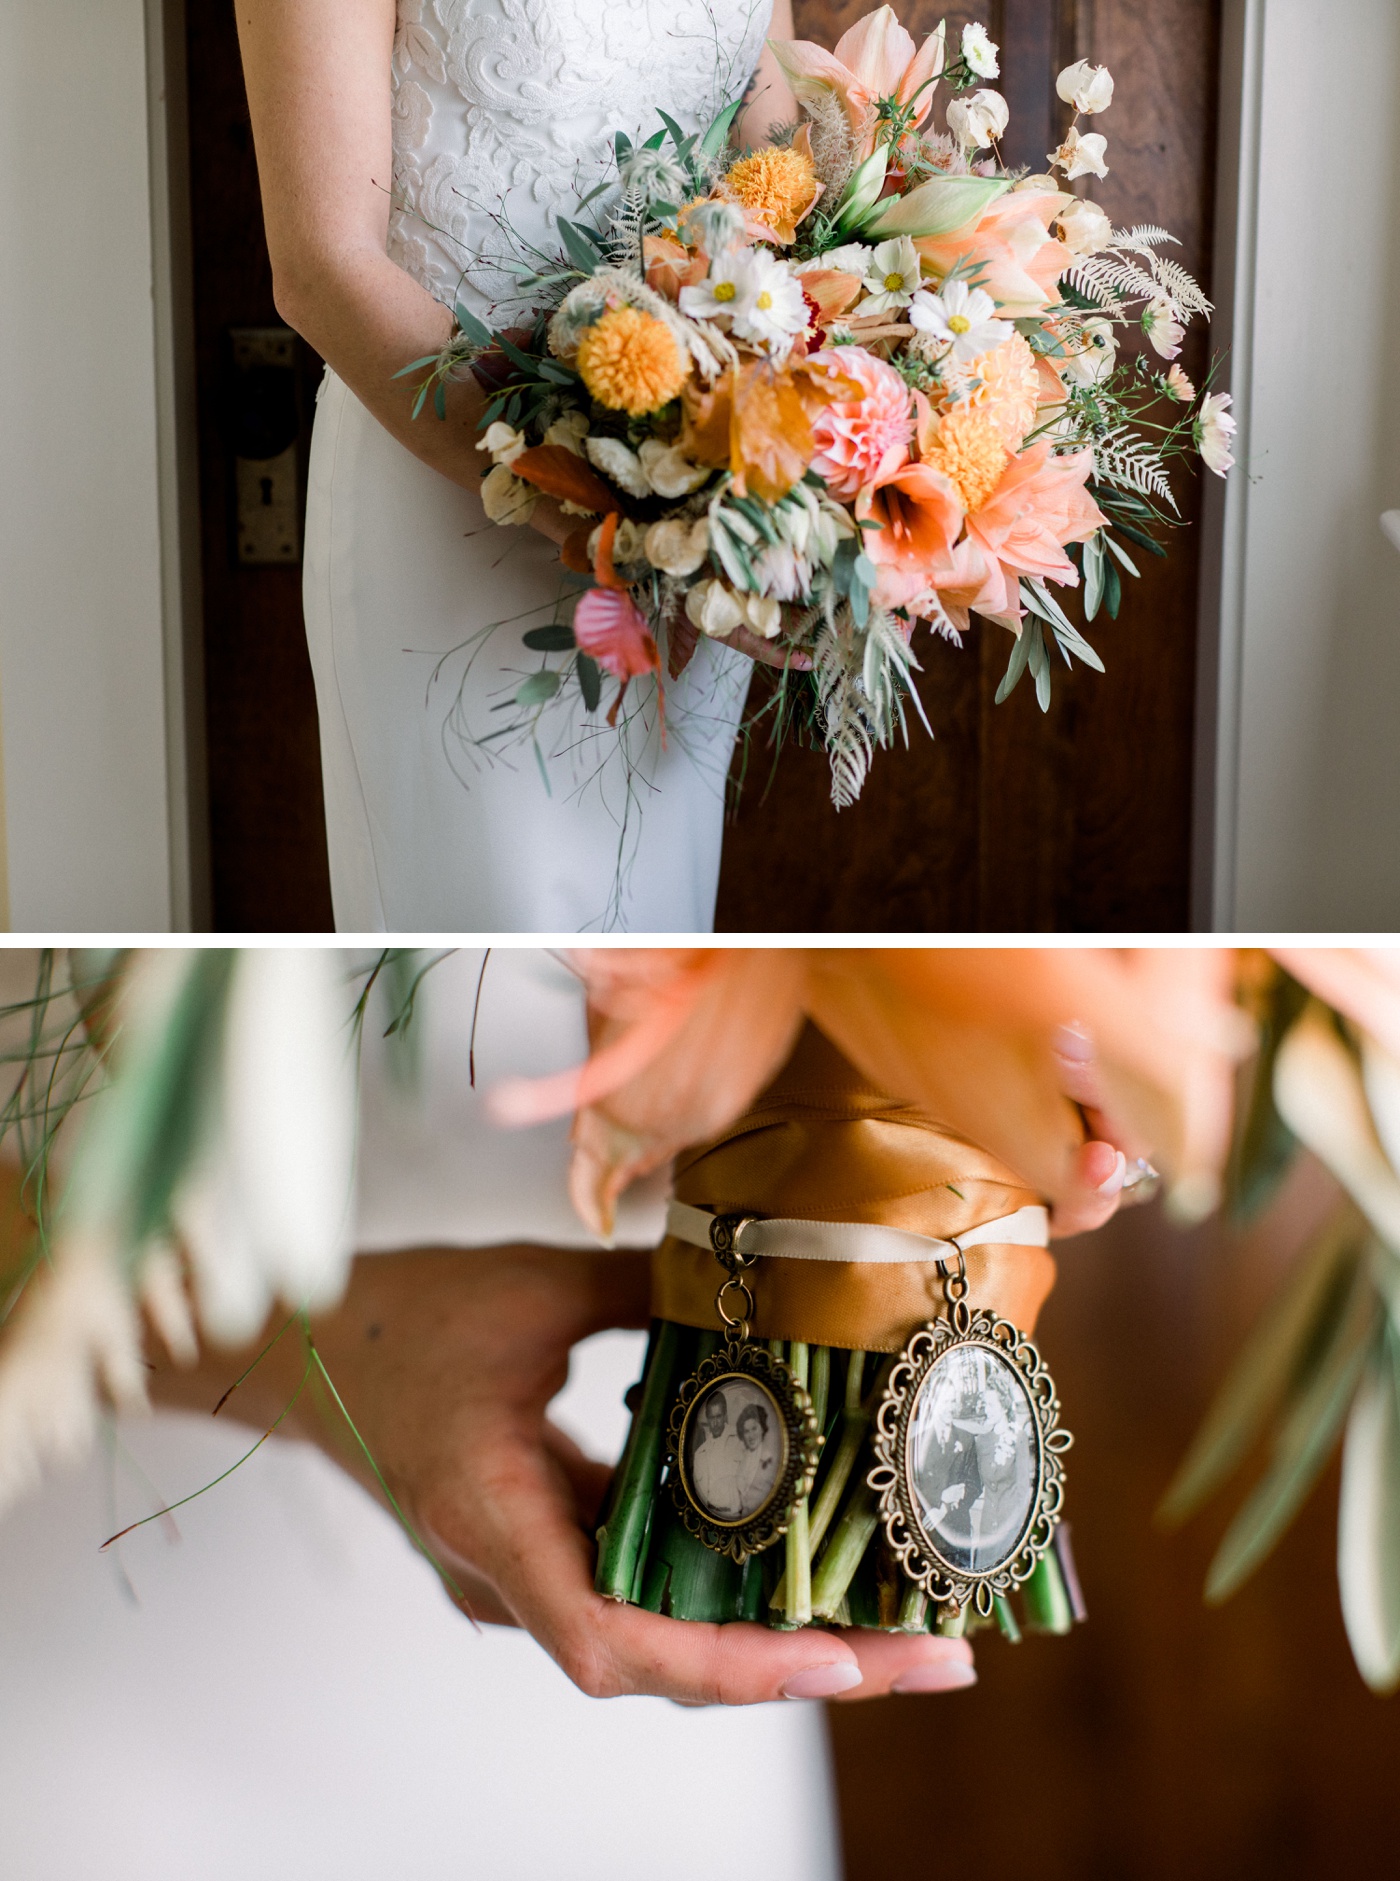 Bridal bouquet filled with peach dahlias, garden roses, Queen Anne's lace, and Italian cuscus